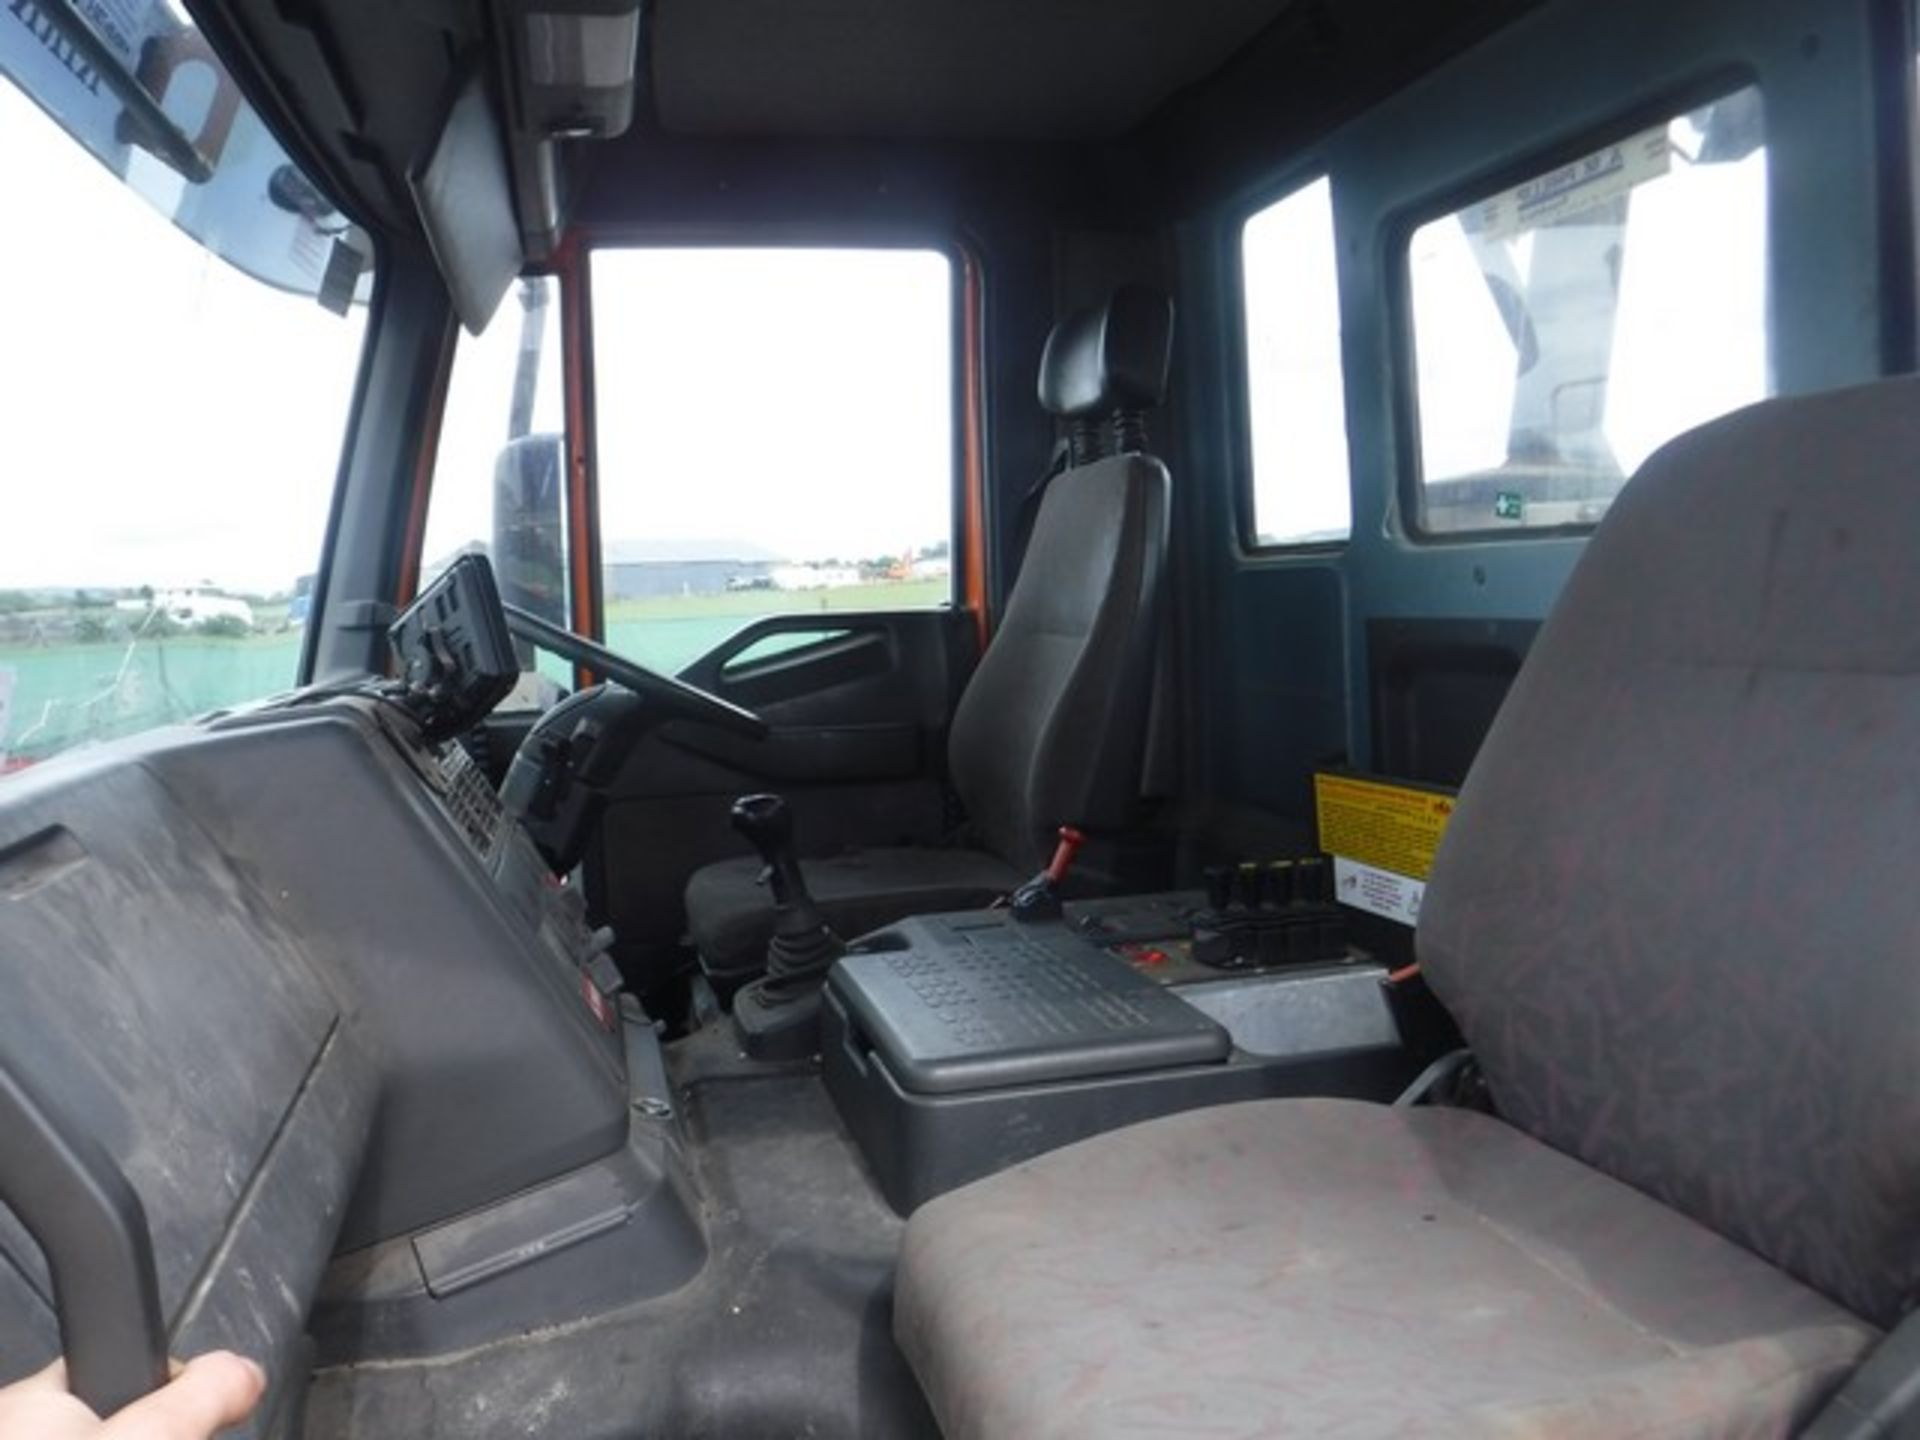 IVECO DAILY 50C15 3.5WB - 7790cc - Image 7 of 41